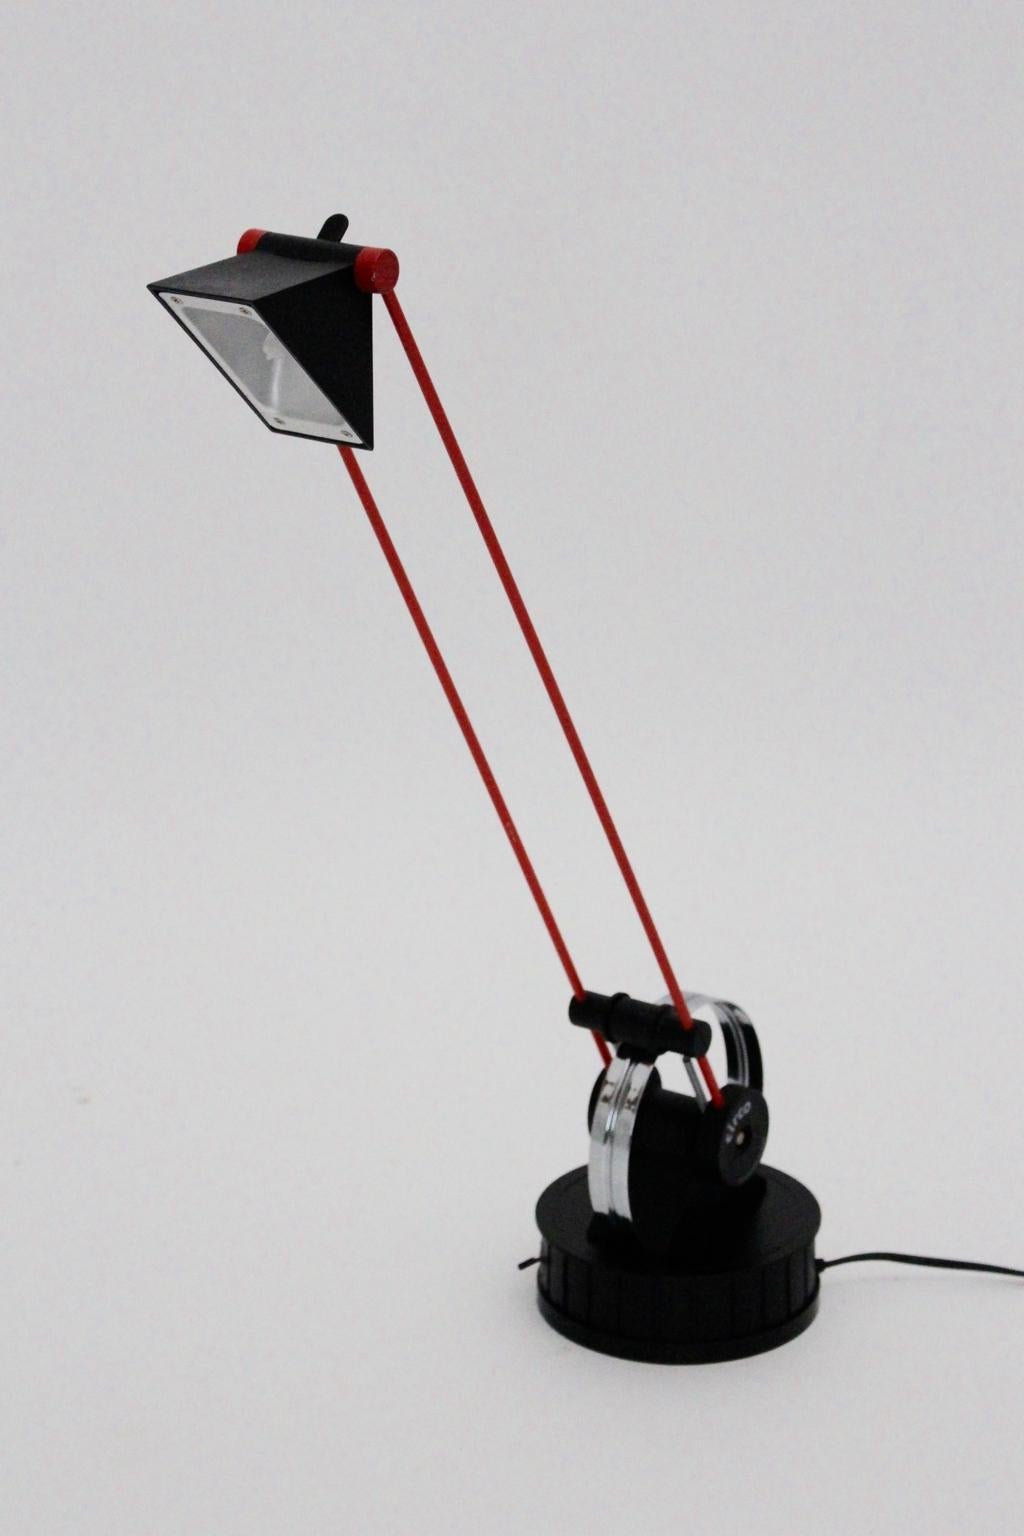 Modern Red and Black Plastic Vintage Desk Lamp by Linke Plewa Germany 1990s In Good Condition For Sale In Vienna, AT